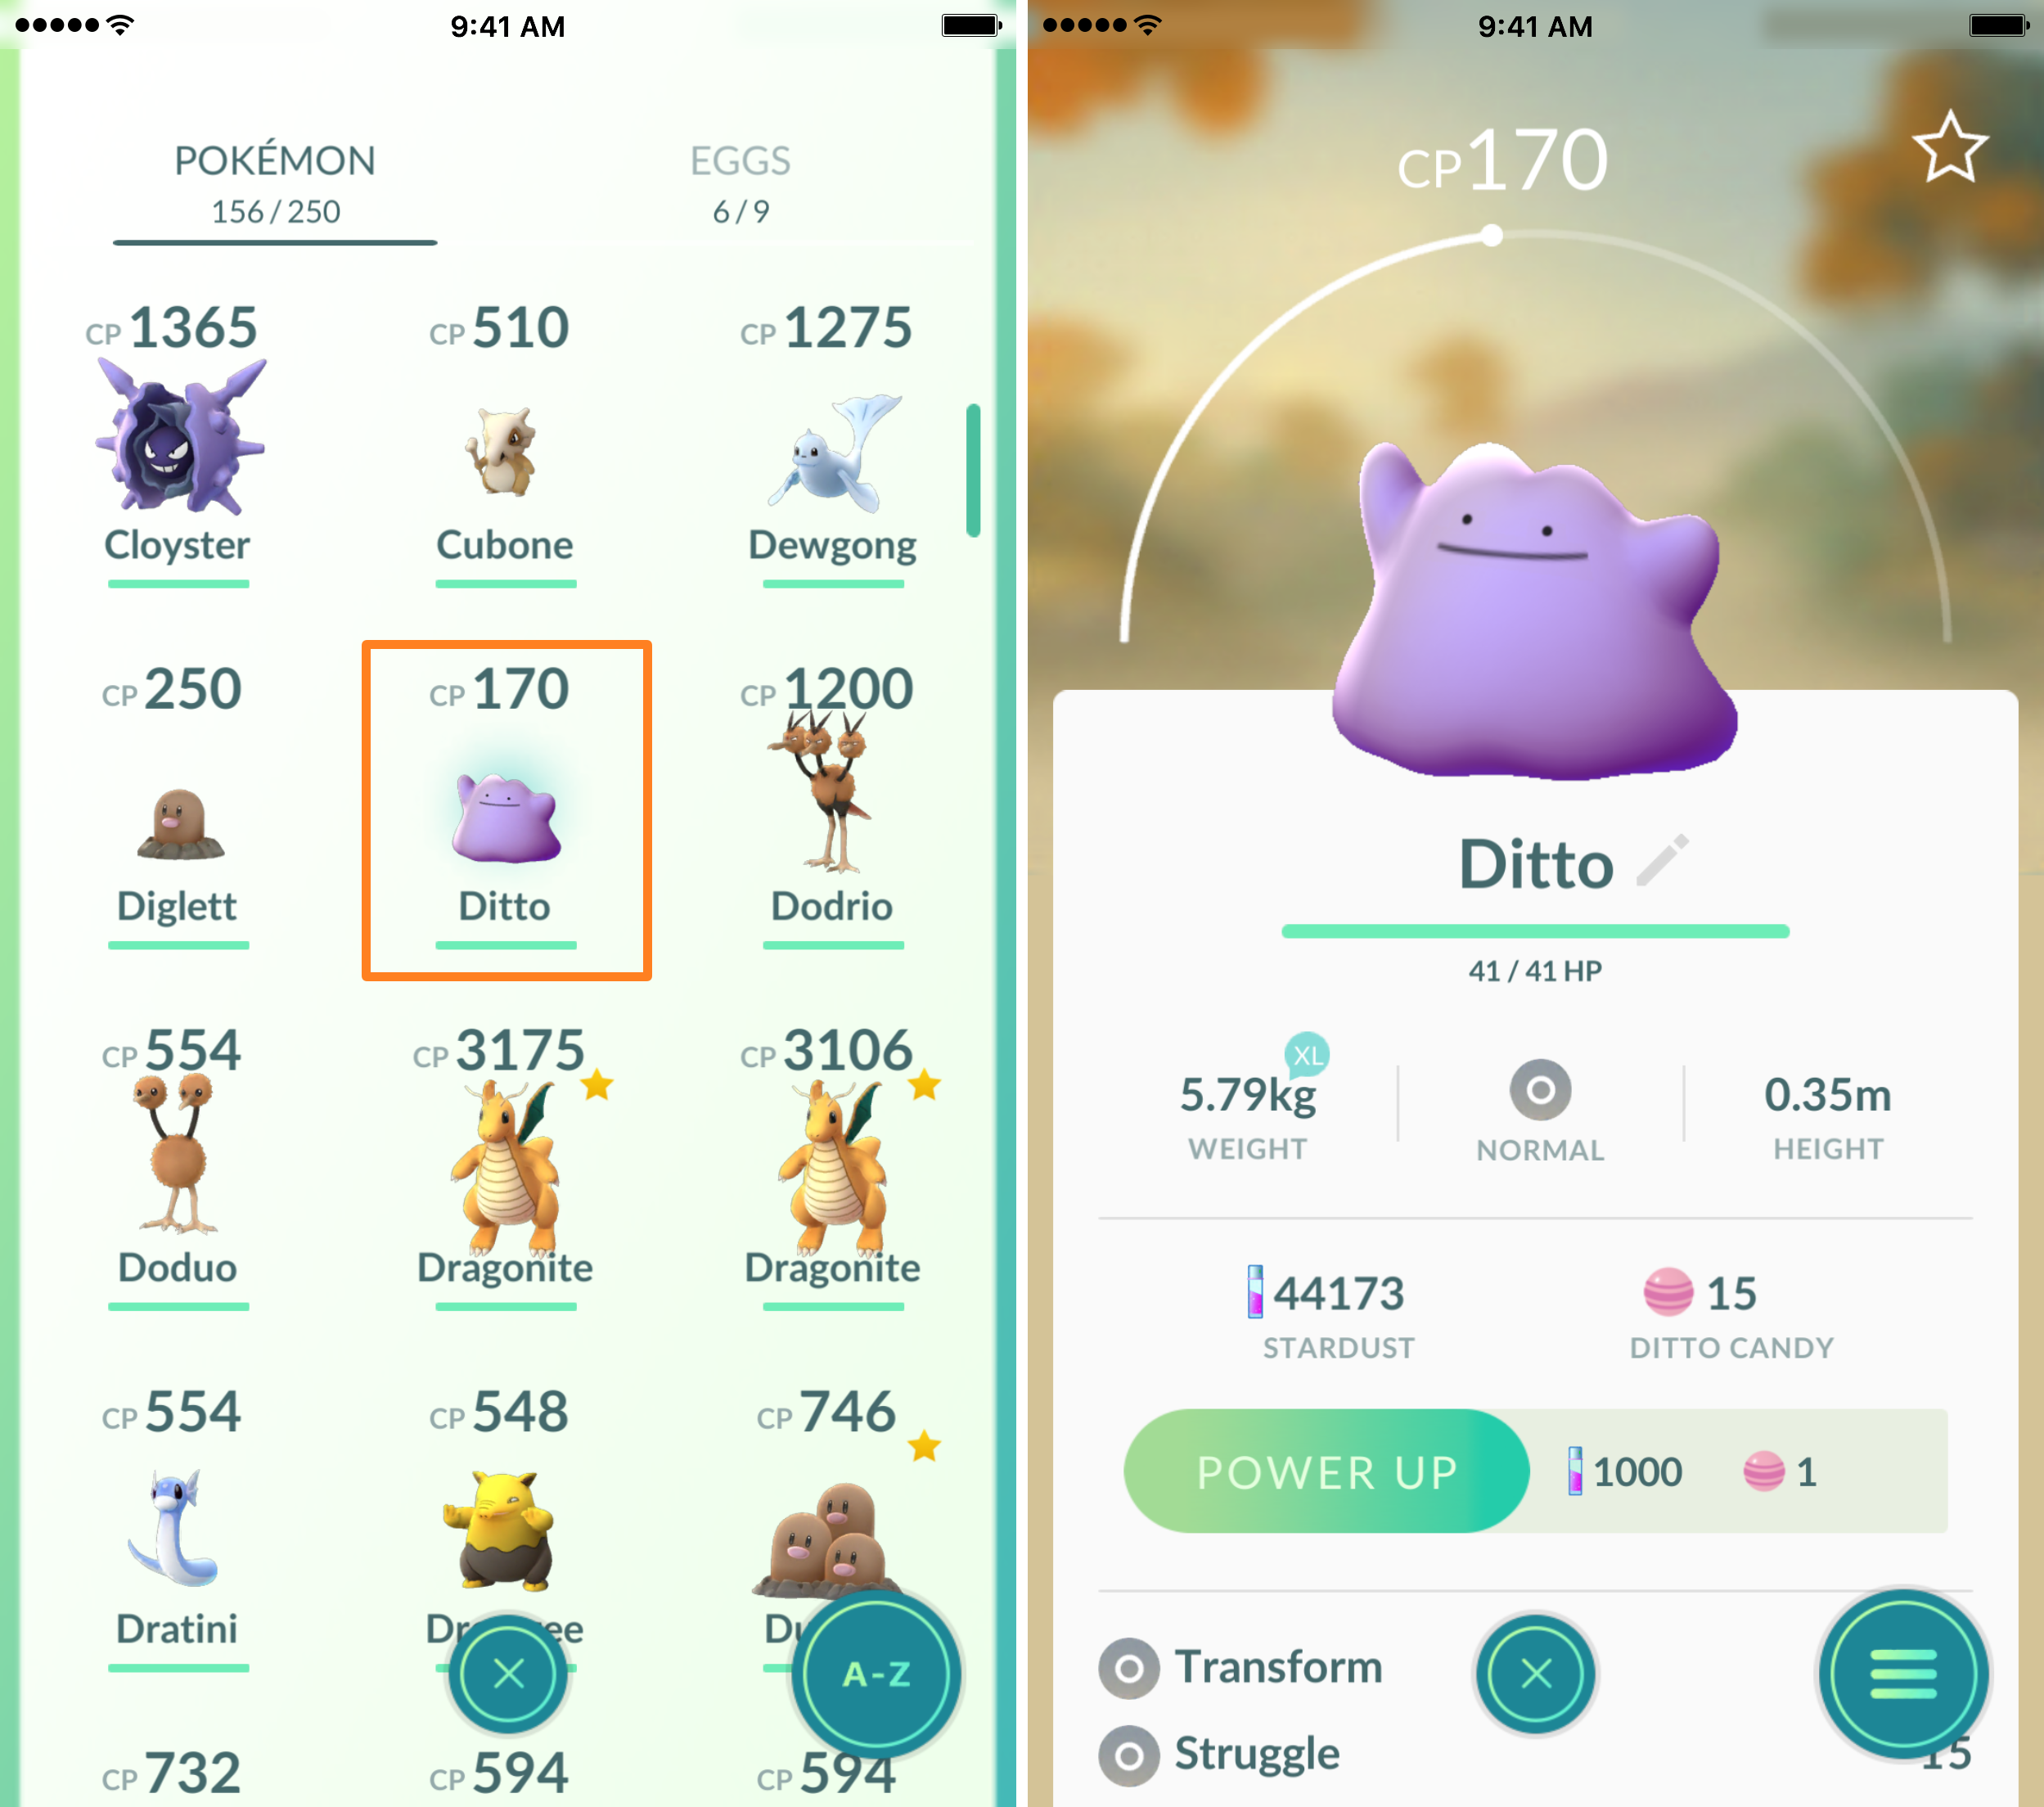 Everything you need to know about Ditto in Pokémon GO